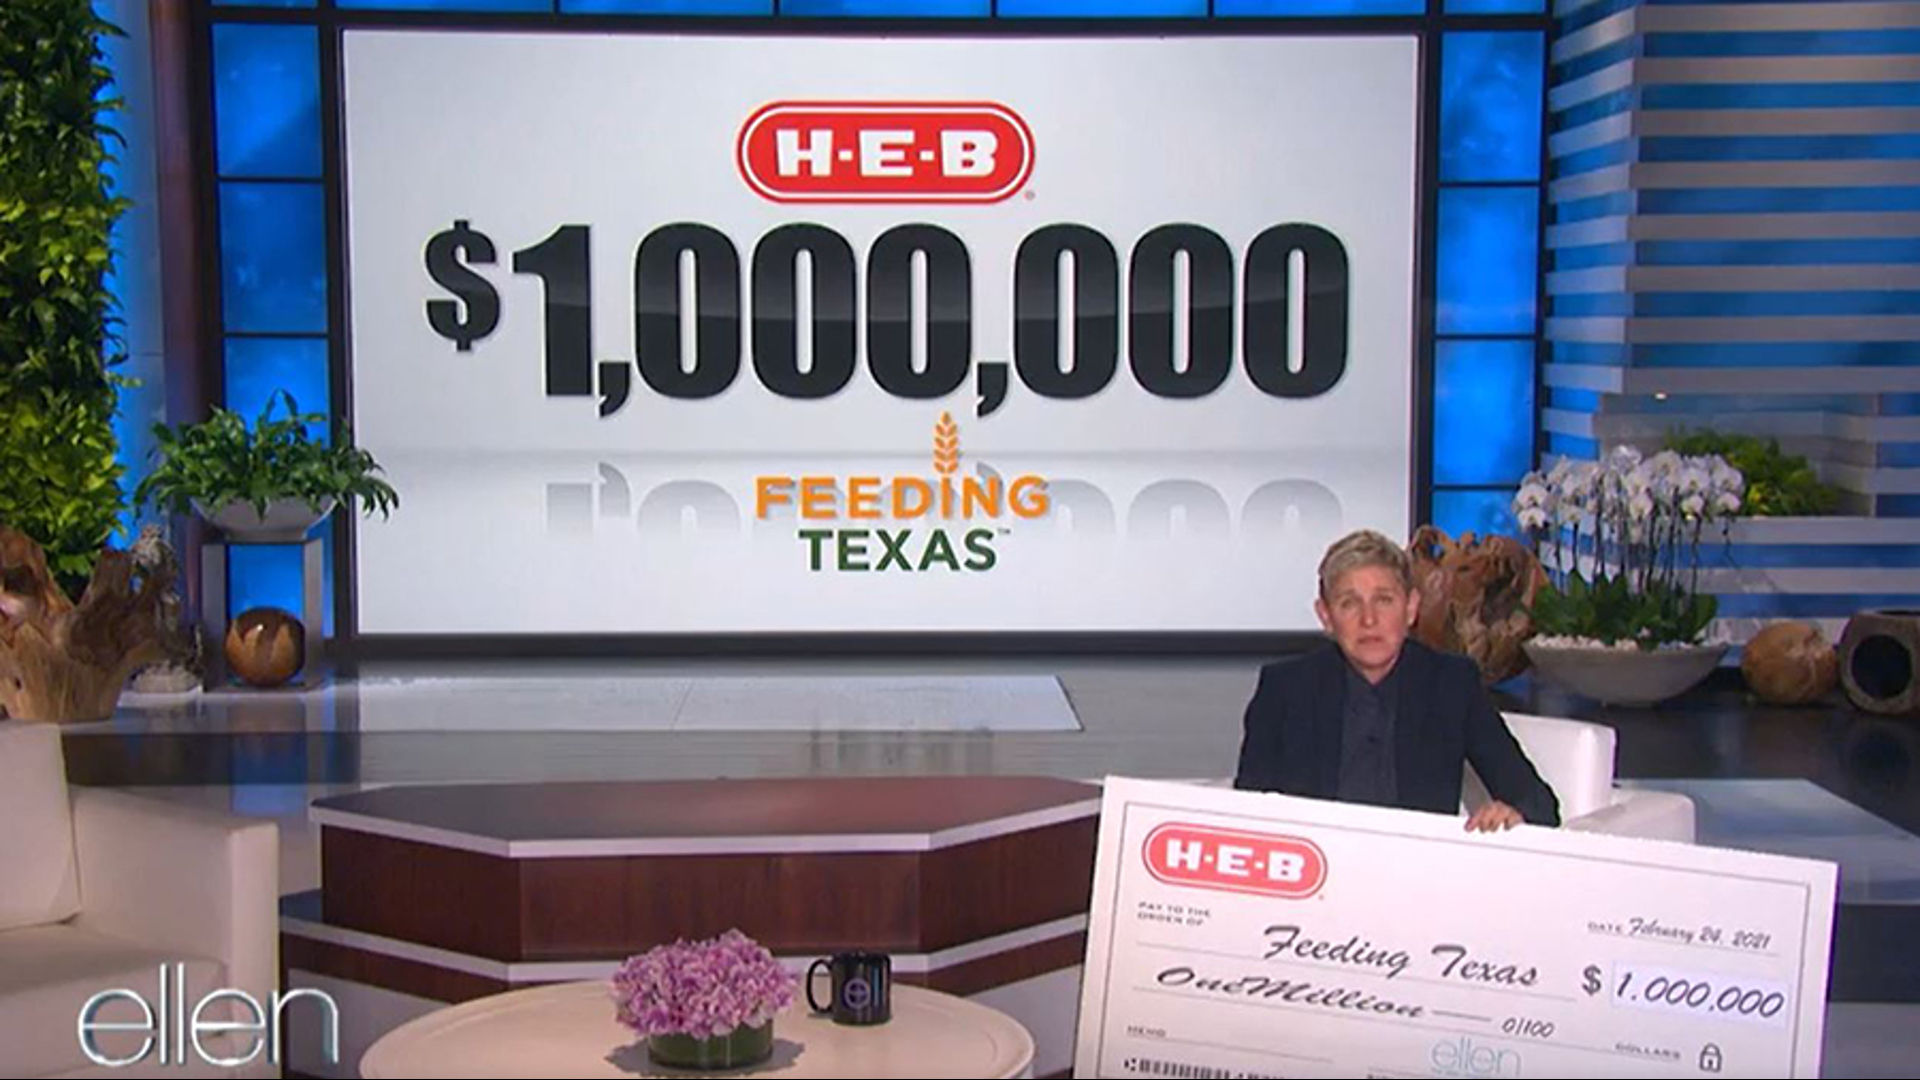 HEB donated $1 million to help food banks across the state after the winter storm. "HEB is a grocery store chain committed to taking care of Texans," Ellen said.